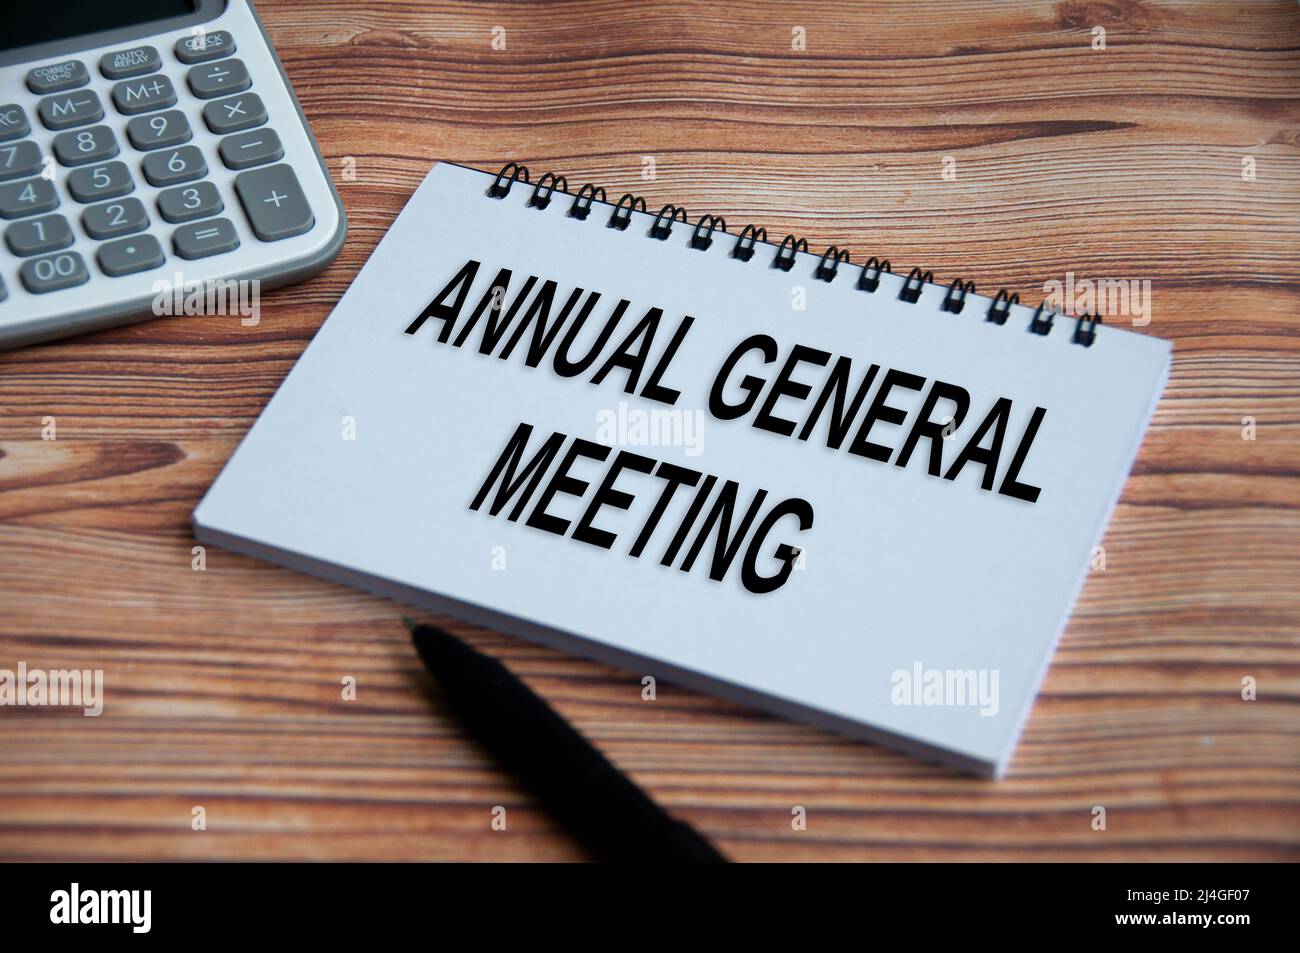 Annual general meeting text on notepad with calculator, pen and wooden table background. Business concept Stock Photo